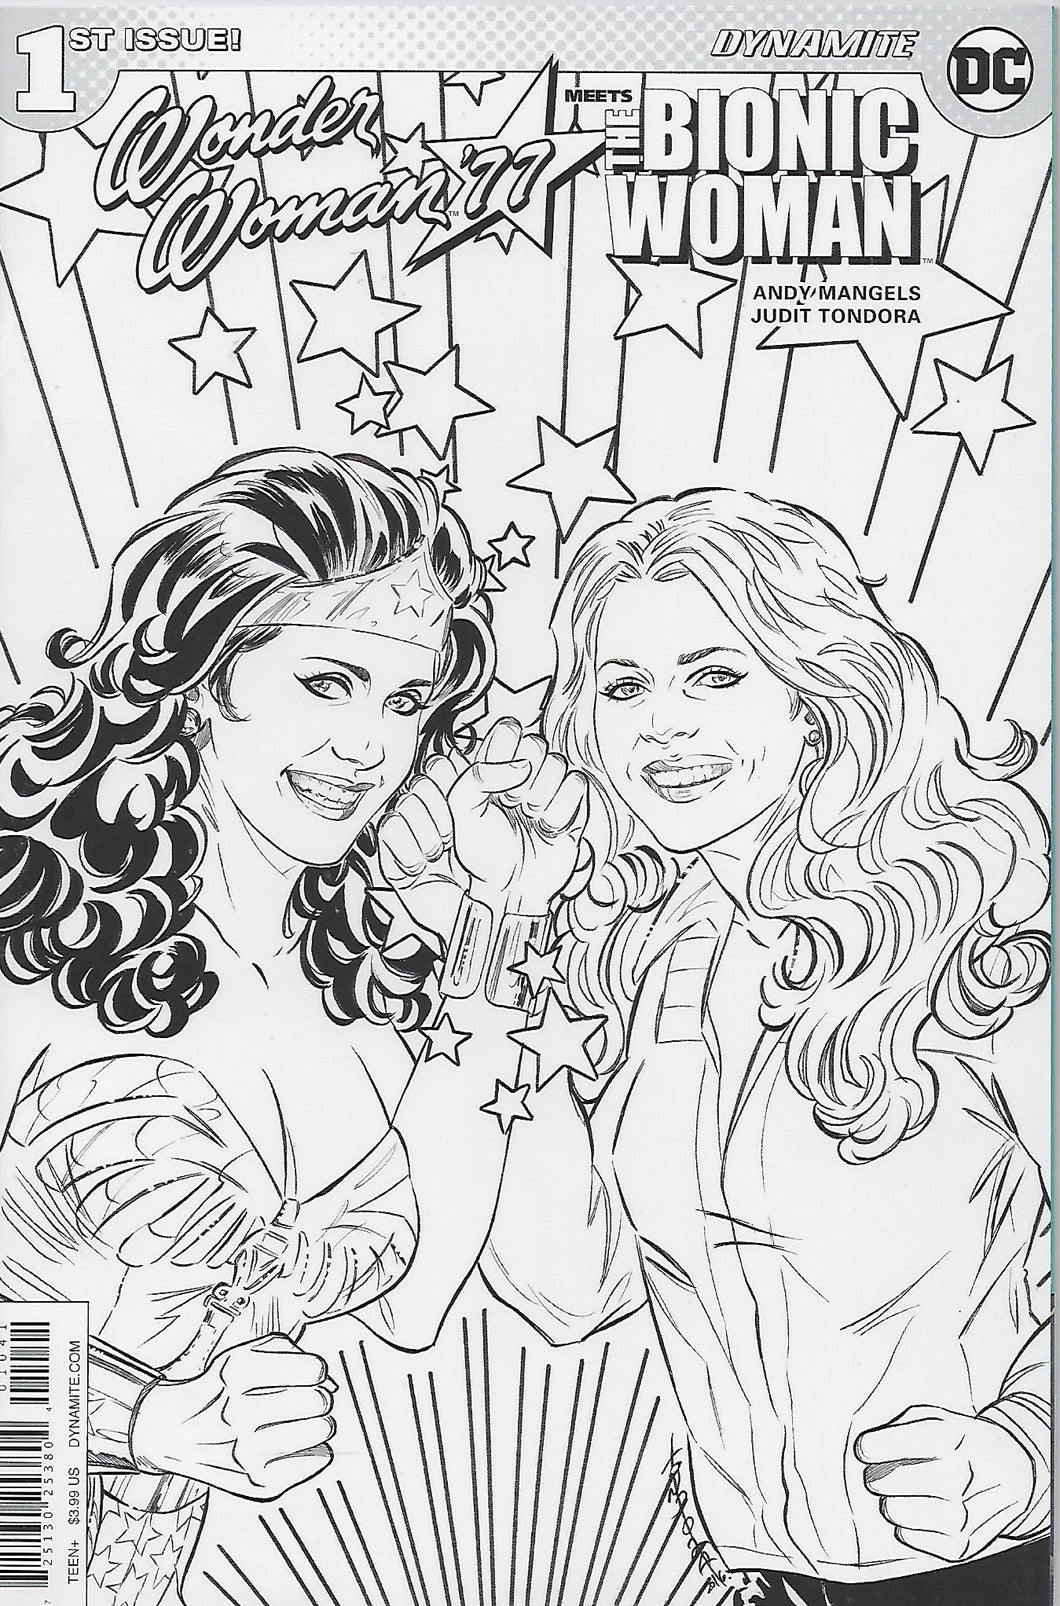 Wonder Woman '77 Meets the Bionic Woman #1 Coloring Book Cover 